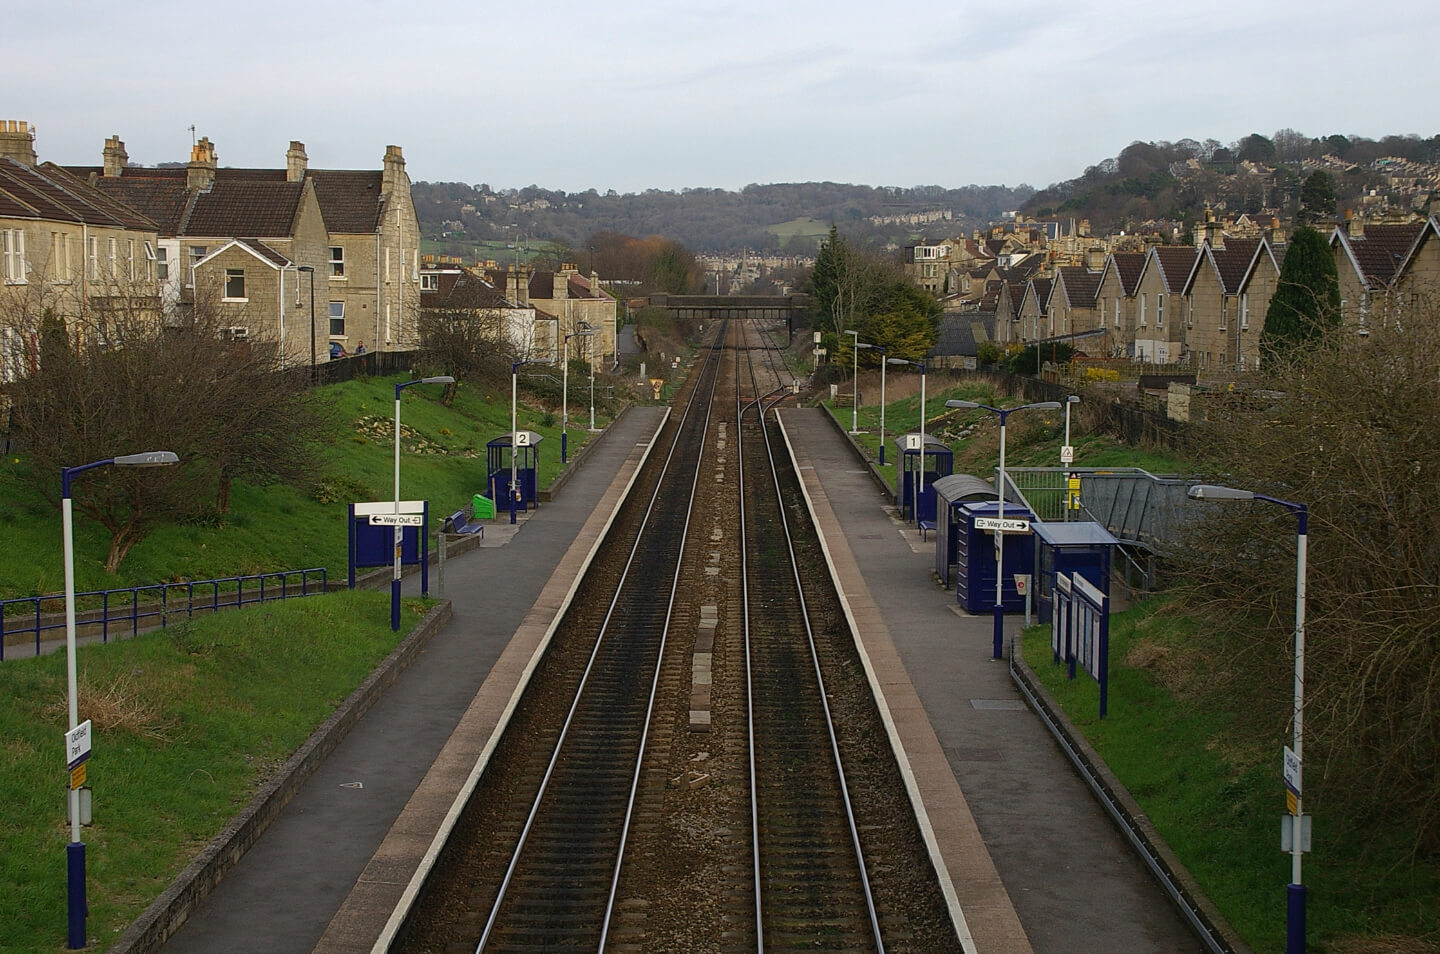 Student Accommodation in Oldfield Park, Bath - Oldfield Park Railway Station